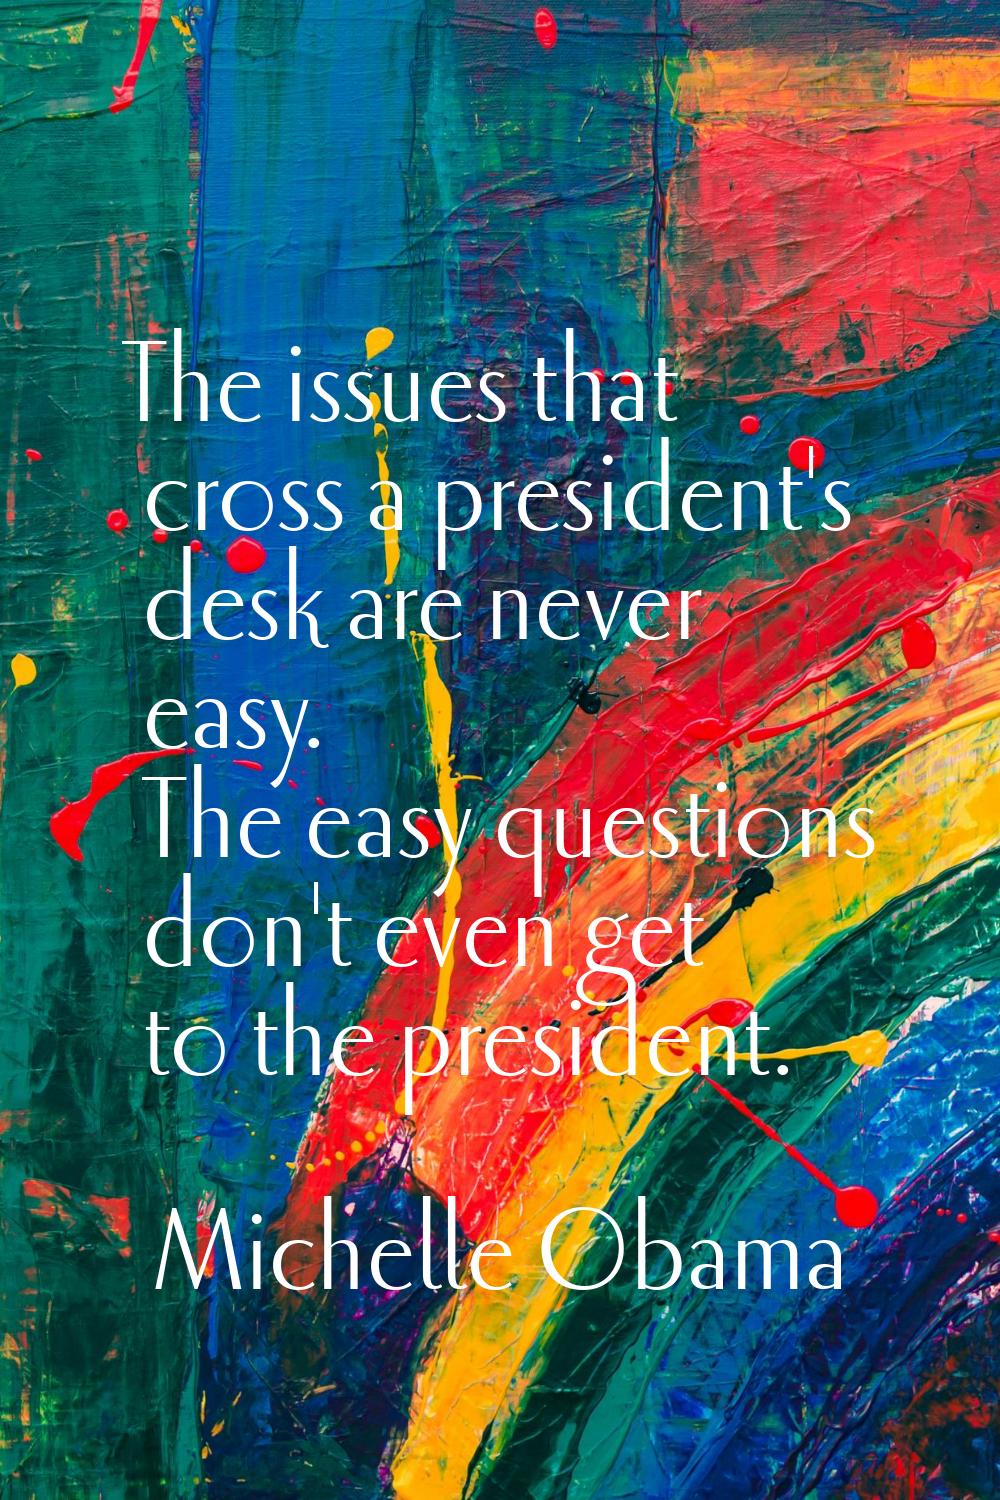 The issues that cross a president's desk are never easy. The easy questions don't even get to the p